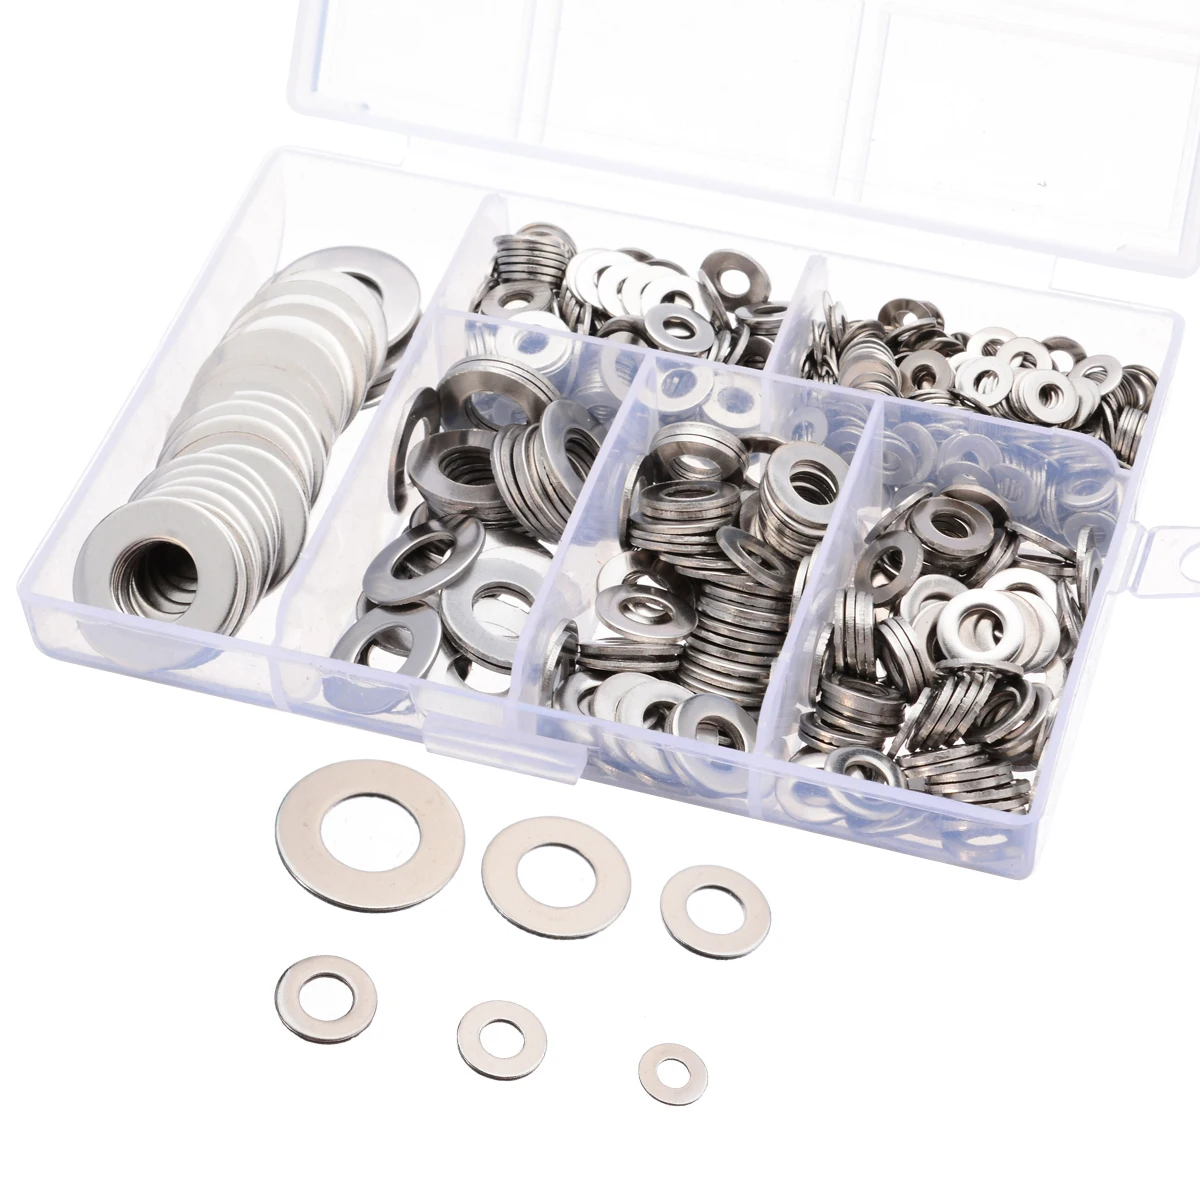 200 ASSORTED PIECE A2 STAINLESS STEEL FORM A FLAT WASHERS M3 M4 M5 M6 M8 M10 KIT 